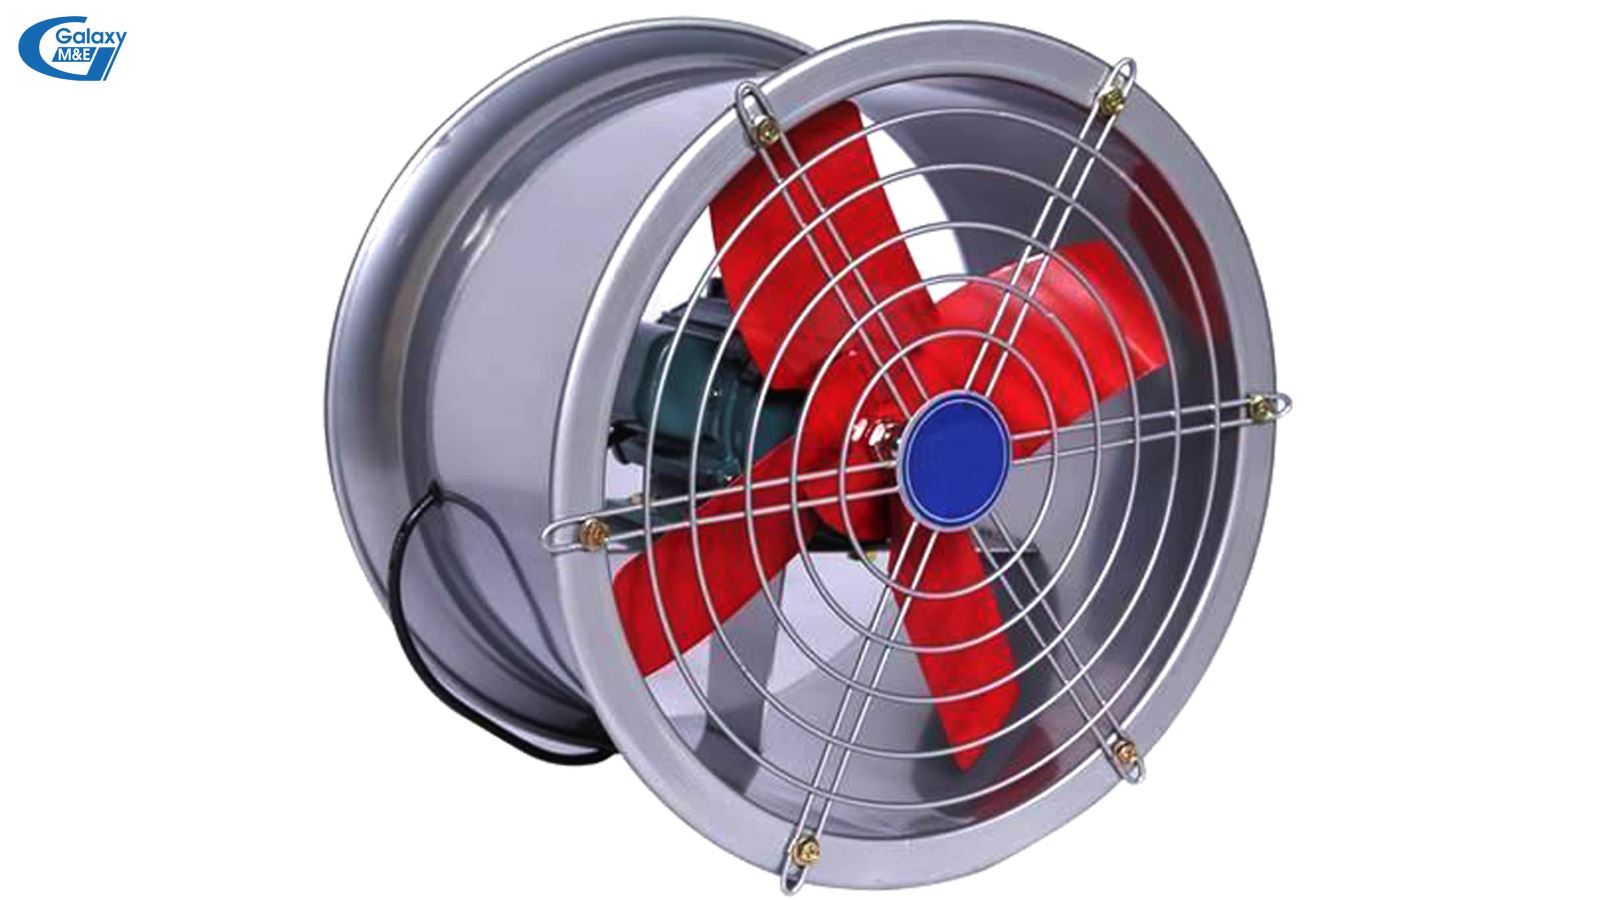 The airflow of the axial fans is only 1/5 of that of the belt driven type